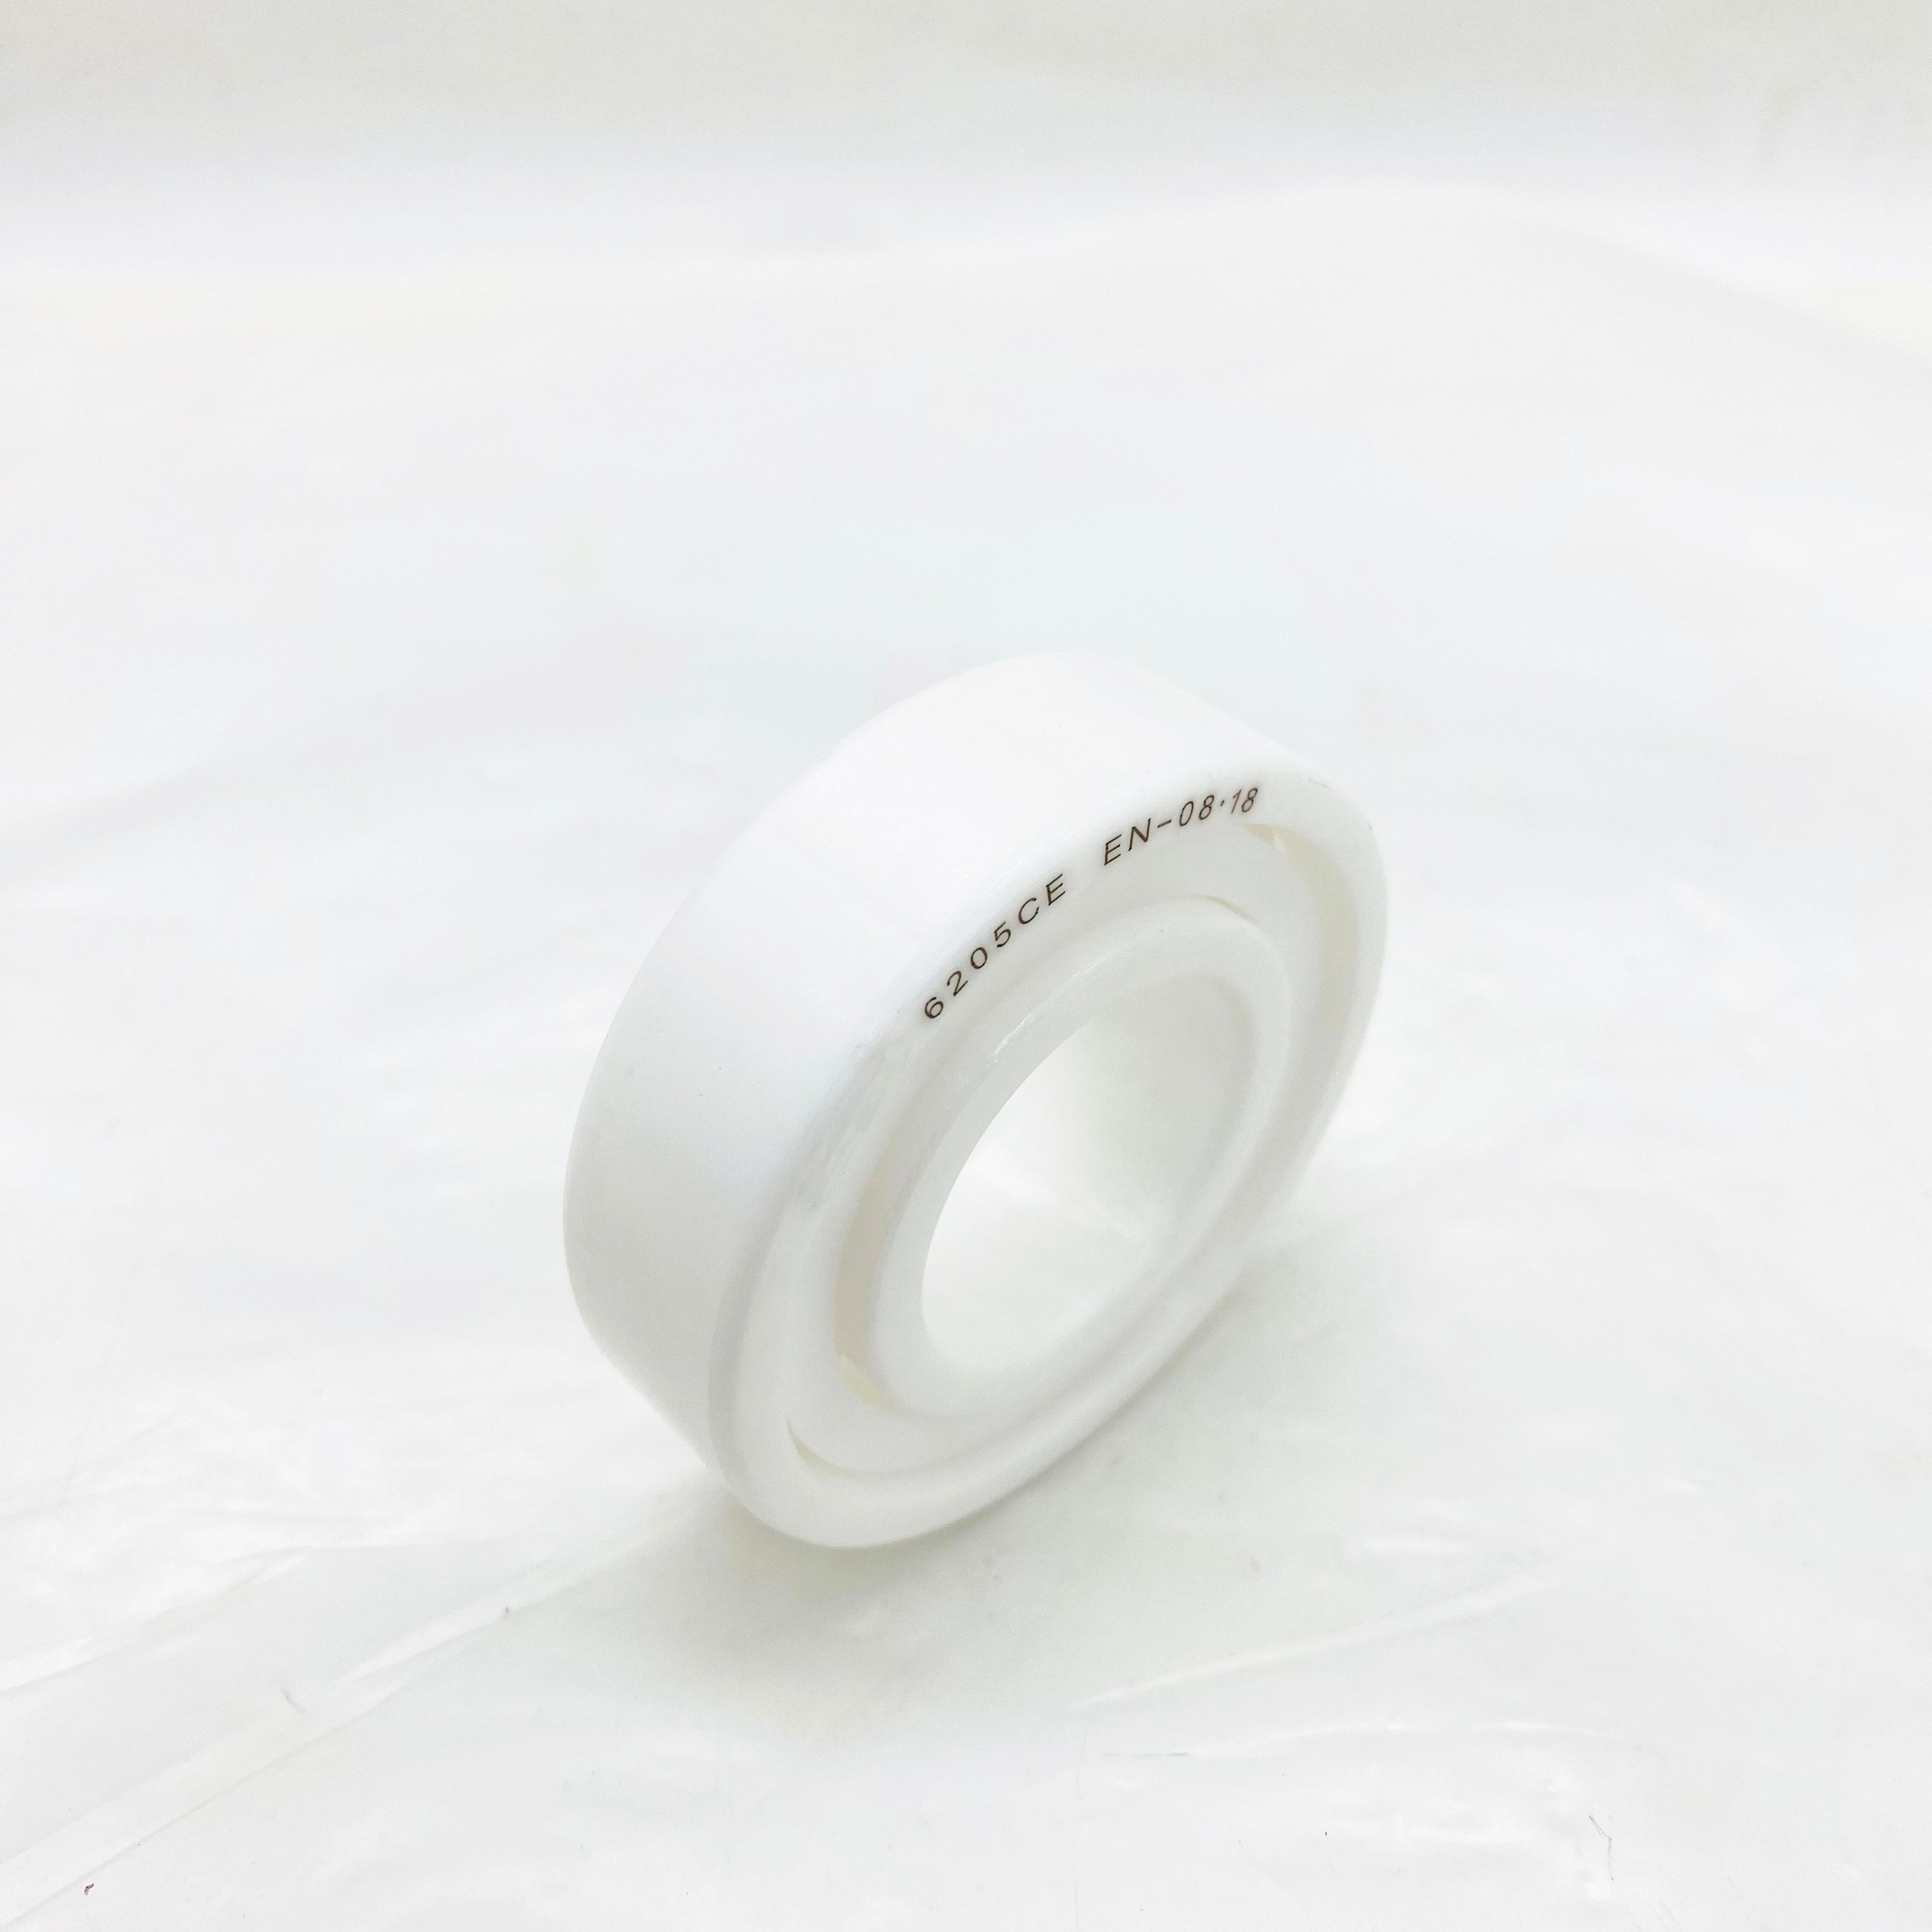 NSK 6205 CE Full Ceramic Bearing 25X52X15mm Ball Bearing with High Quality and Competitive Price